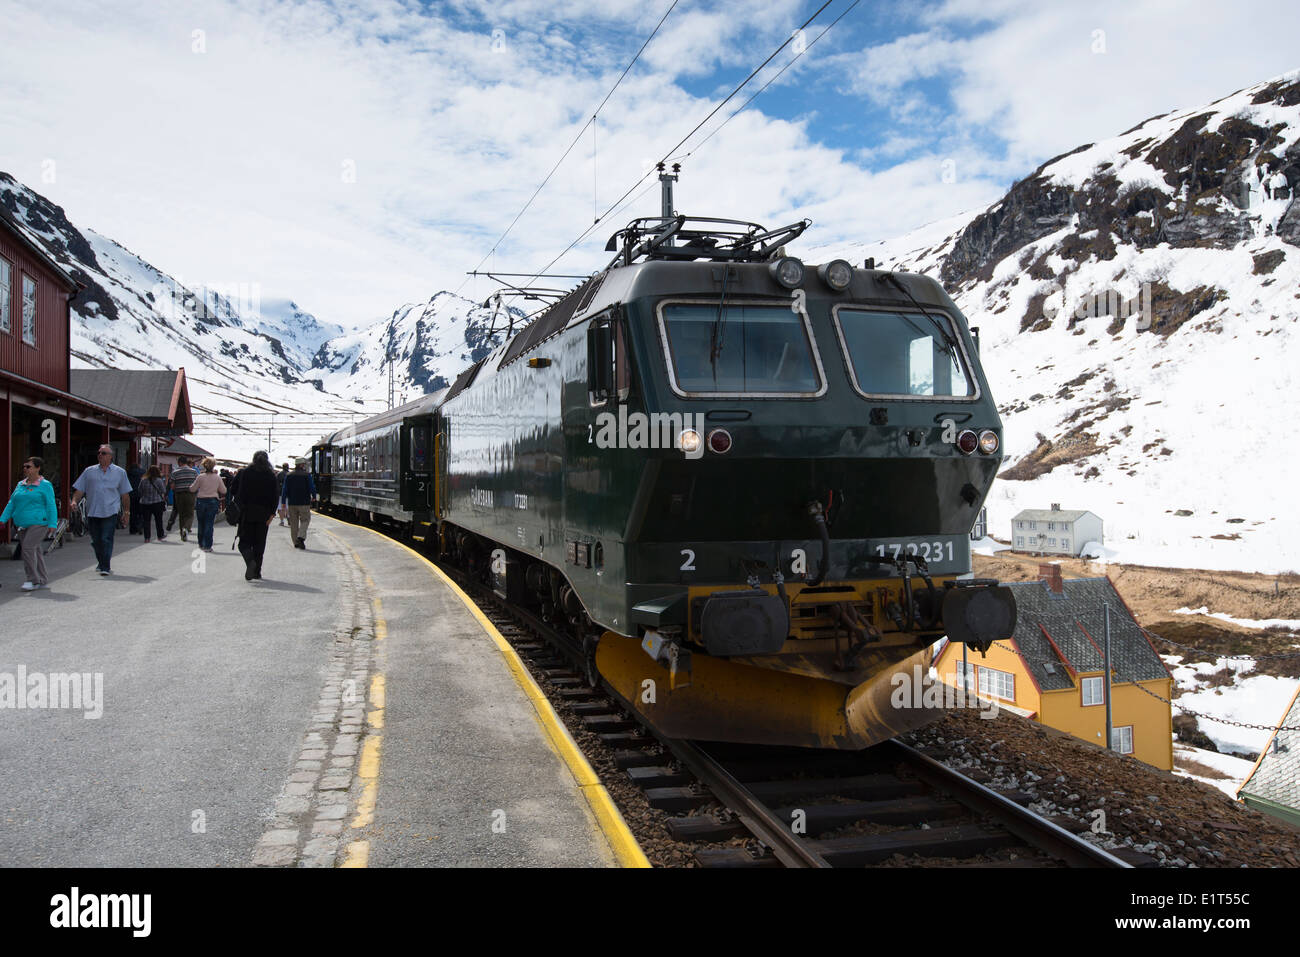 Flamsbana Railway train at Mydral station in Norway Stock Photo